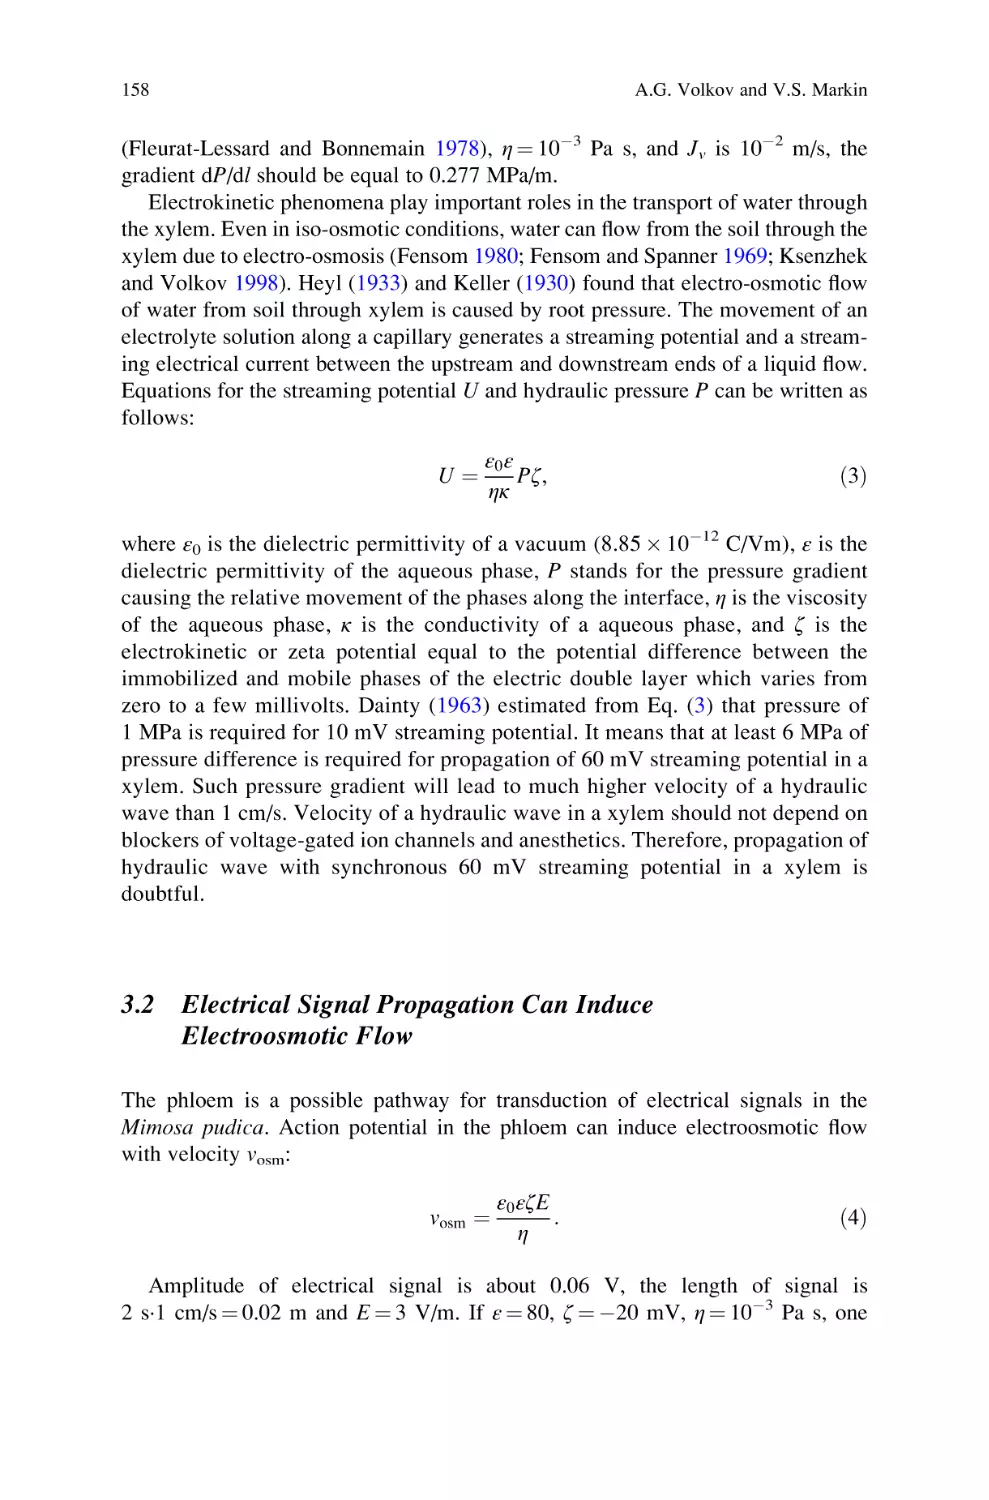 3.2 Electrical Signal Propagation Can Induce Electroosmotic Flow